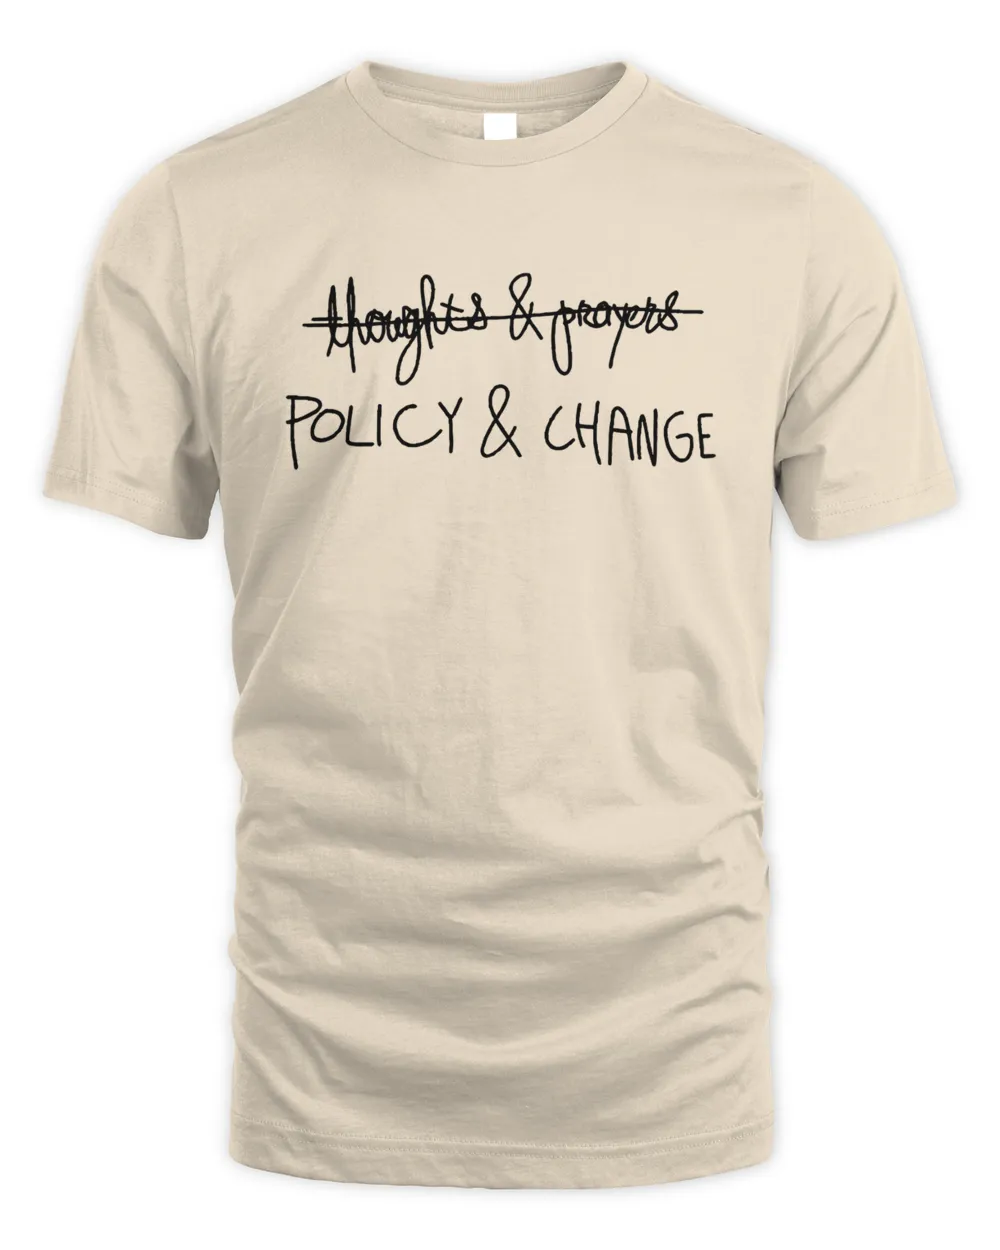 Policy and Change T-Shirt, Unisex Fit